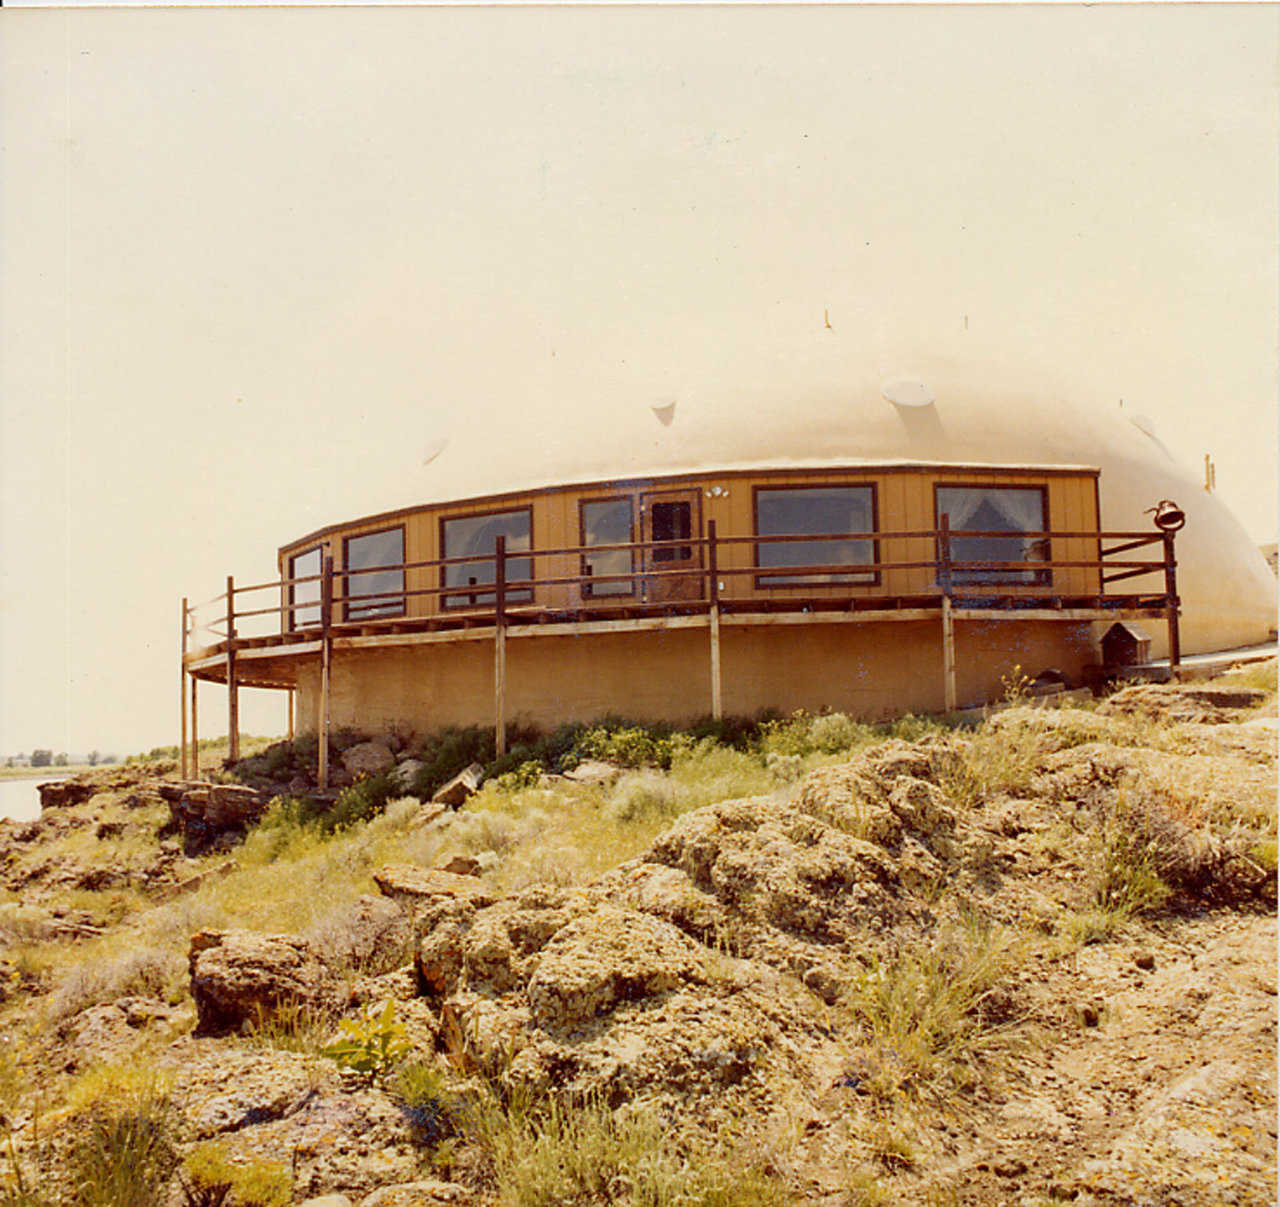 Deck the Dome — At Cliffdome, the Souths’ deck curved around the dome and provided a breath-taking view of the area.